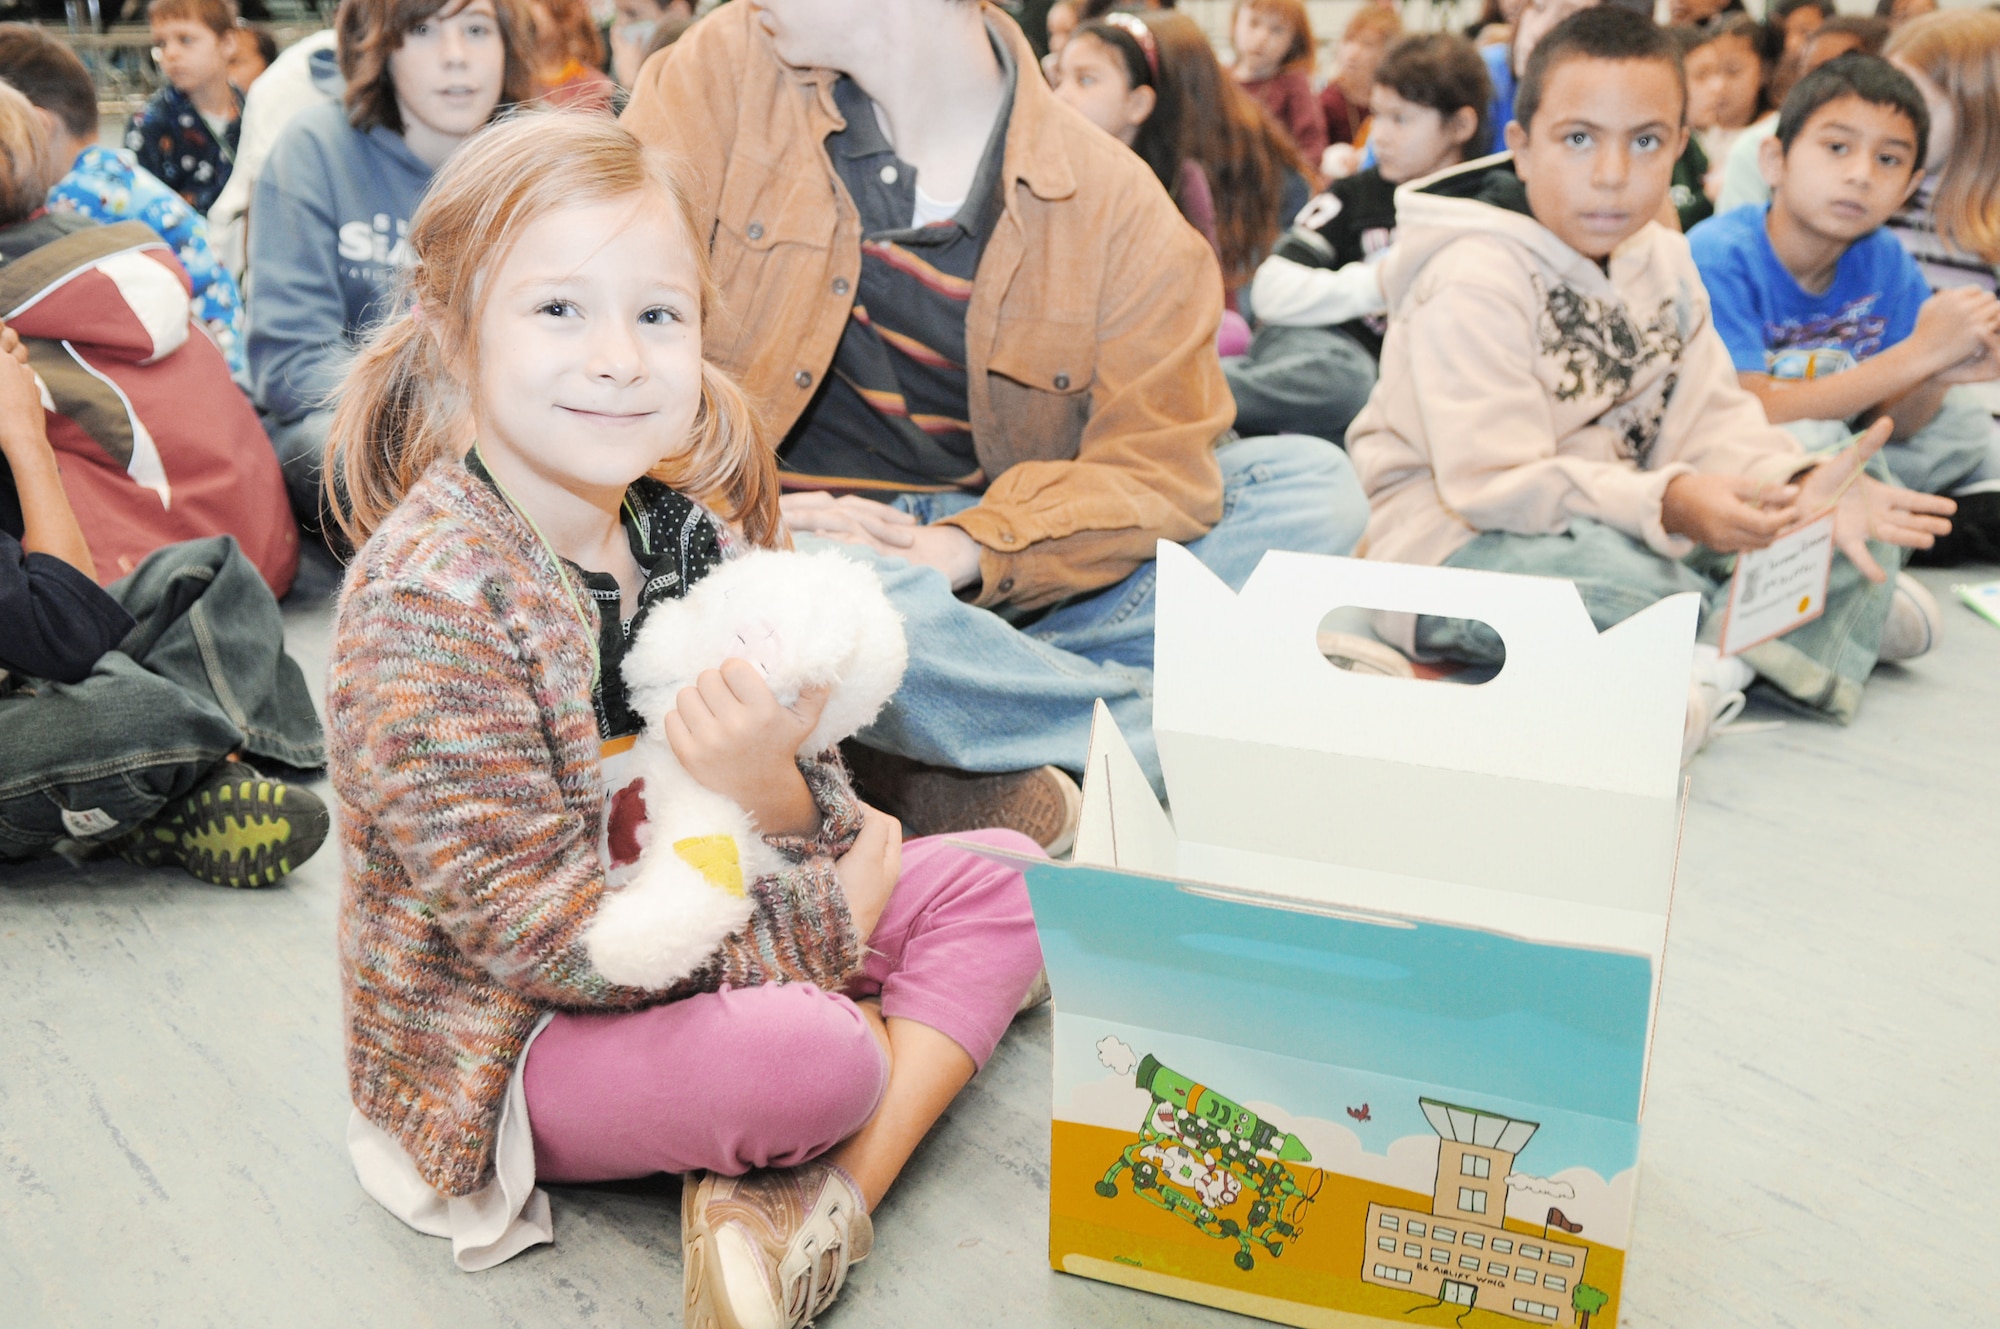 Natalie Zenk, 6, smiles after receiving one of the first Cuzzie Cares Deployment Kits Dec. 17, 2009, at Ramstein Air Base, Germany. These kits, designed to comfort school-age children during their parent's deployment, contain journals, stationary, photo albums, countdown calendars, post cards, playing cards, dog tags and a special friend, Cuzzie the Bear. Natalie is the daughter of Capt. Micheal Zenk from the 86th Aeromedical Evacuation Squadron. (U.S. Air Force photo/Airman 1st Class Brittany Perry)